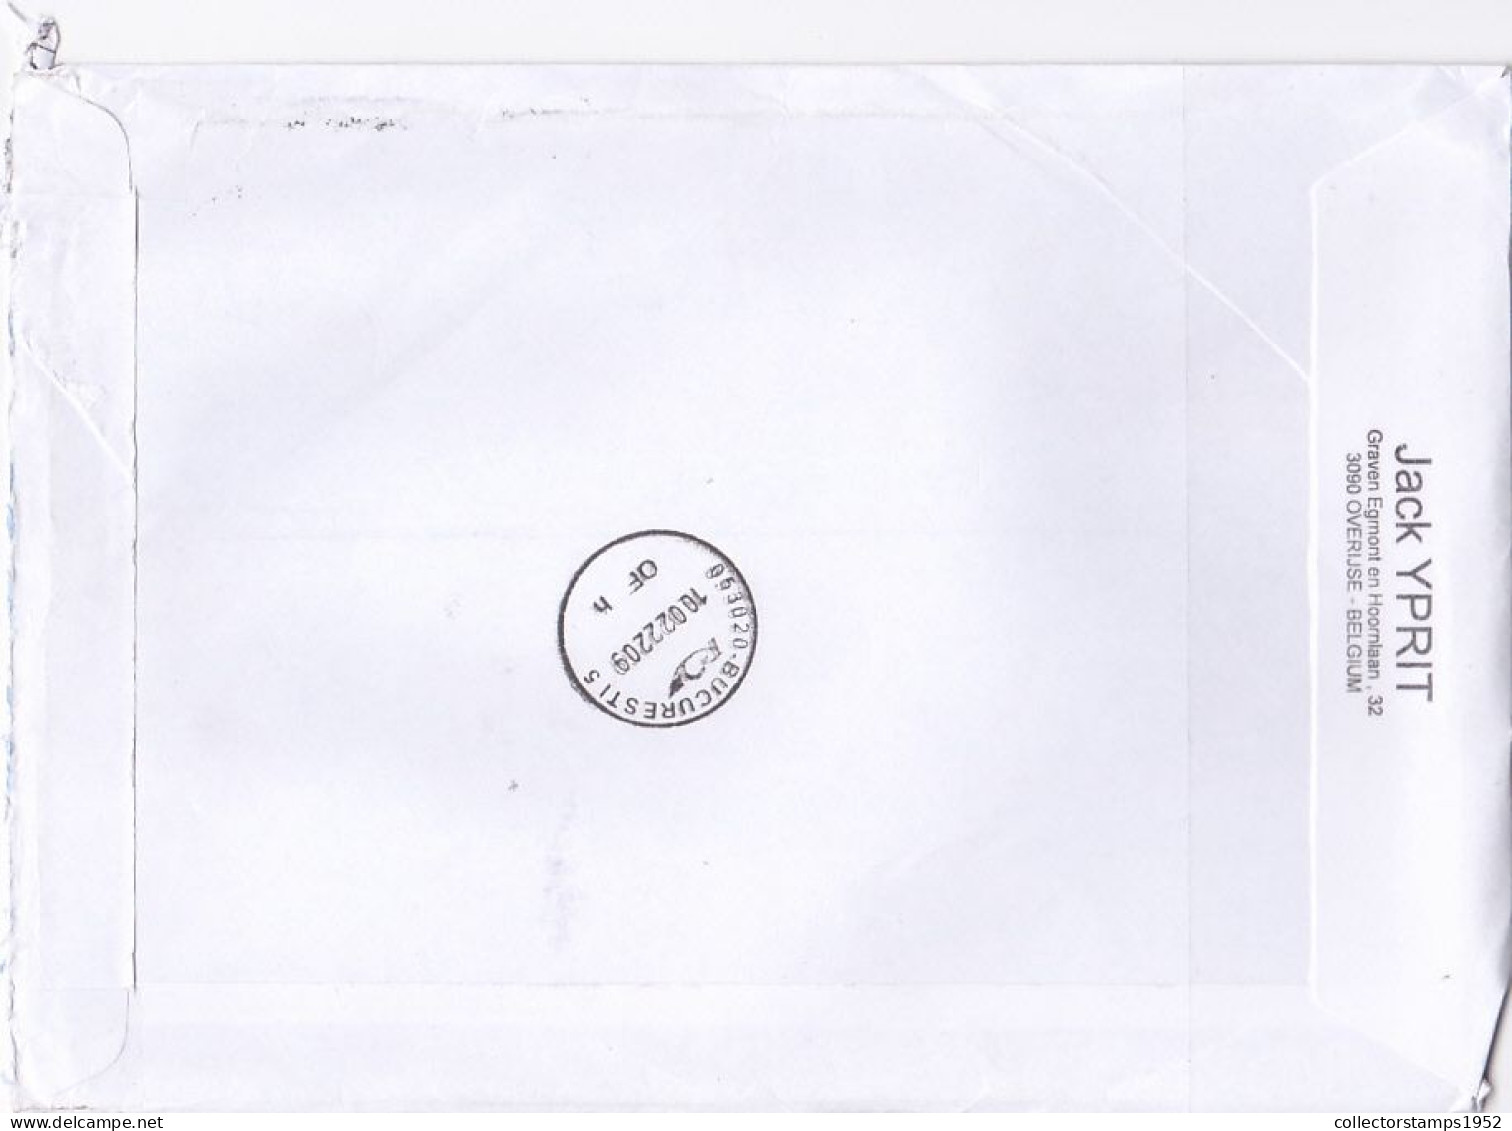 KING PHILIPPE, FINE STAMPS ON COVER, 2011, BELGIUM - Covers & Documents